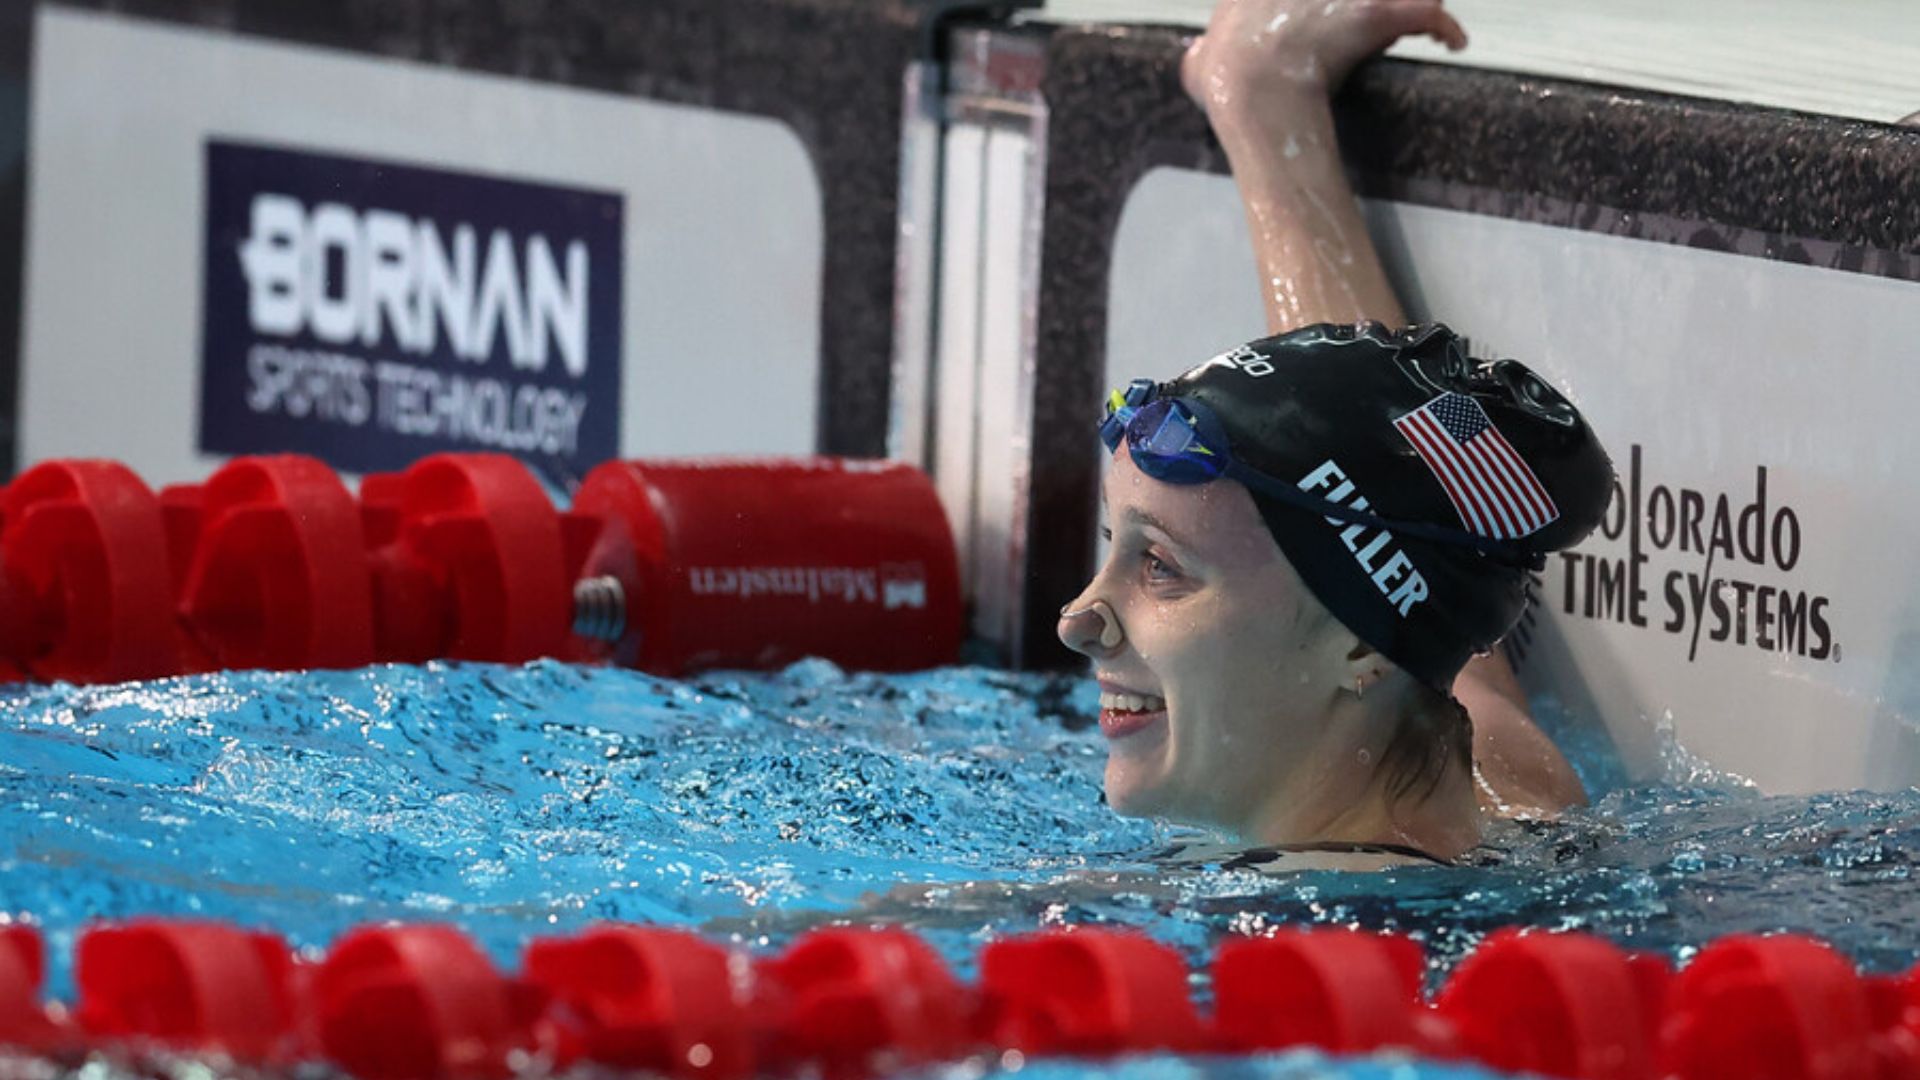 Swimming: United States achieves a golden double in the 100 meters backstroke